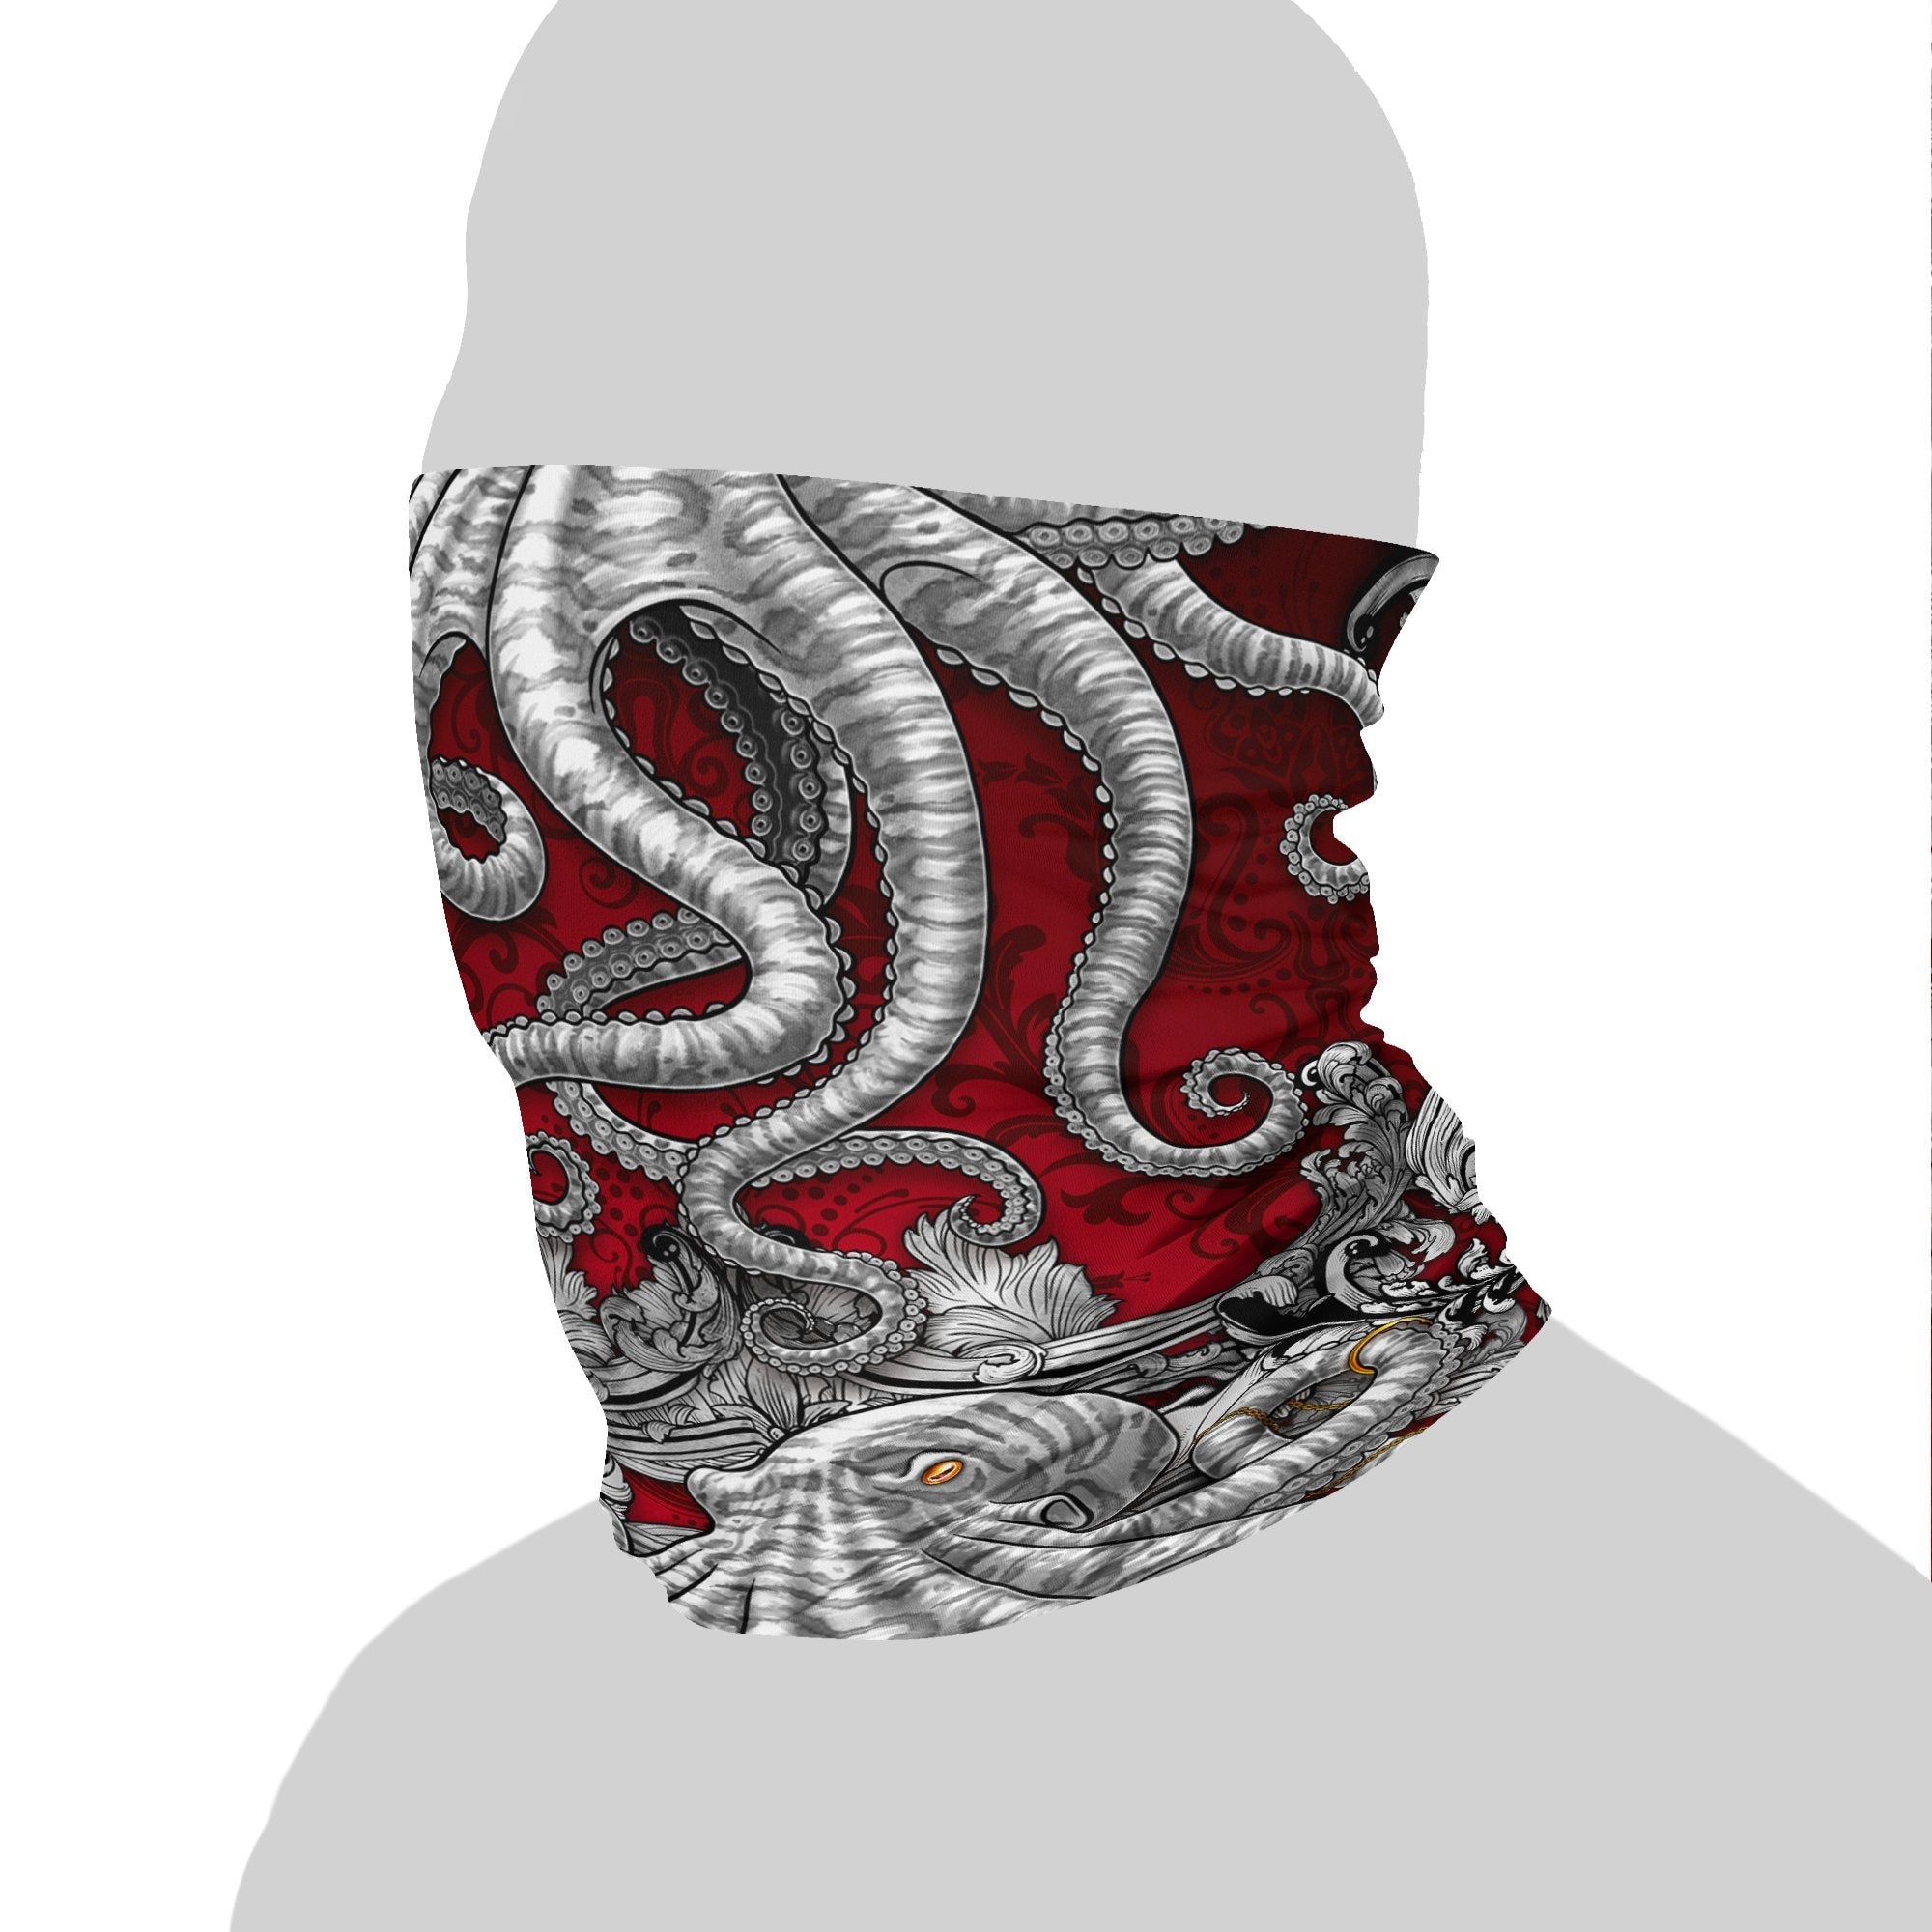 Octopus Neck Gaiter, Face Mask, Head Covering, Indie Outfit - Silver & Red - Abysm Internal